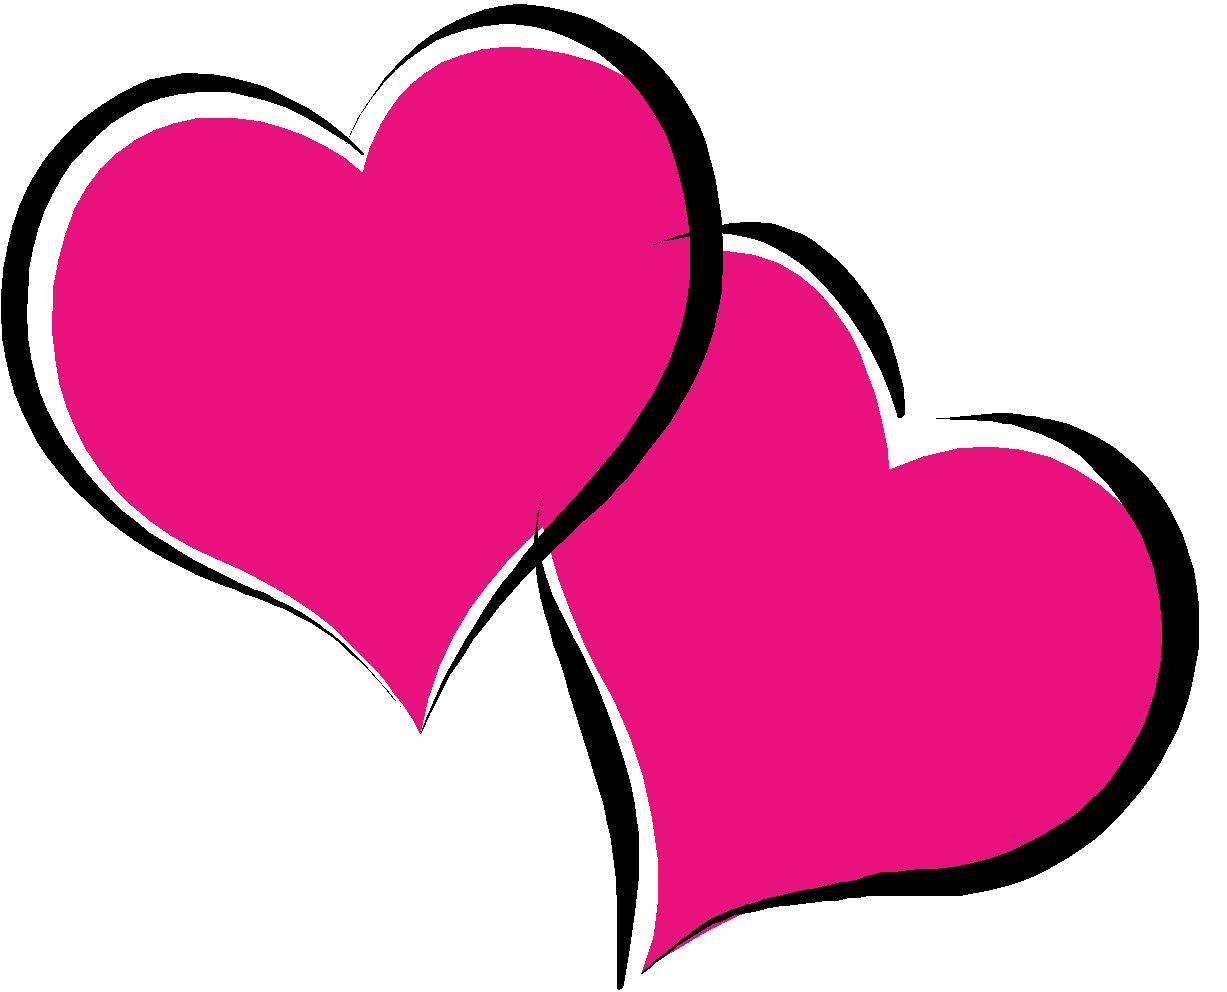 Hearts Heart Images Image Png Clipart